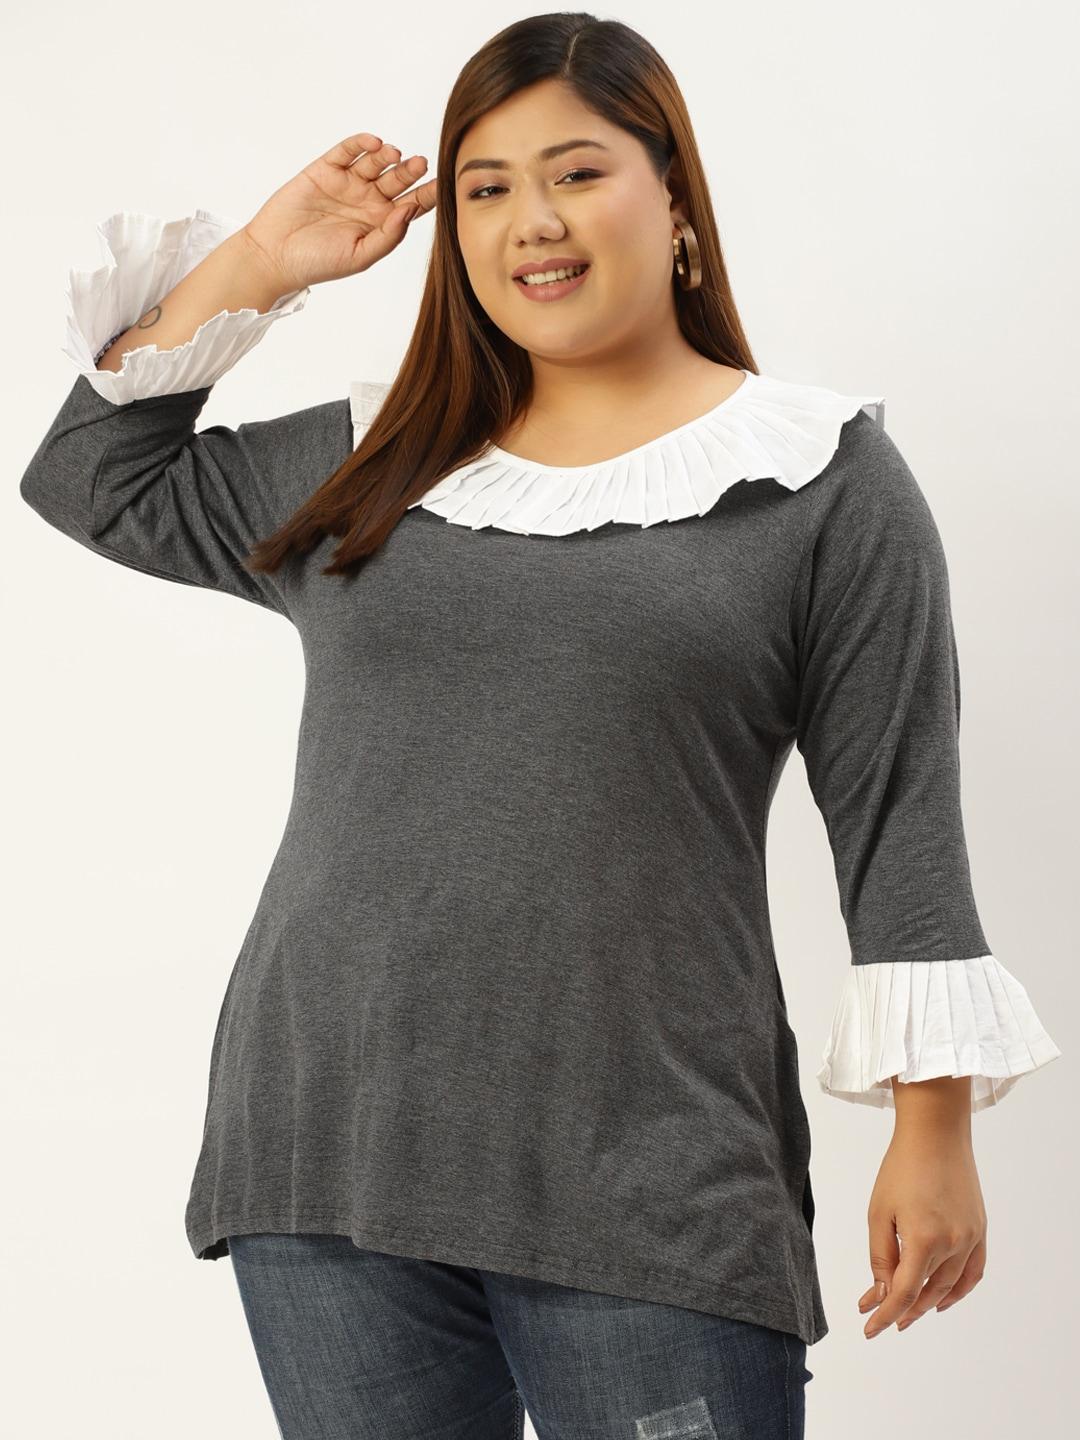 theRebelinme Plus Size Women Charcoal Grey Solid Top